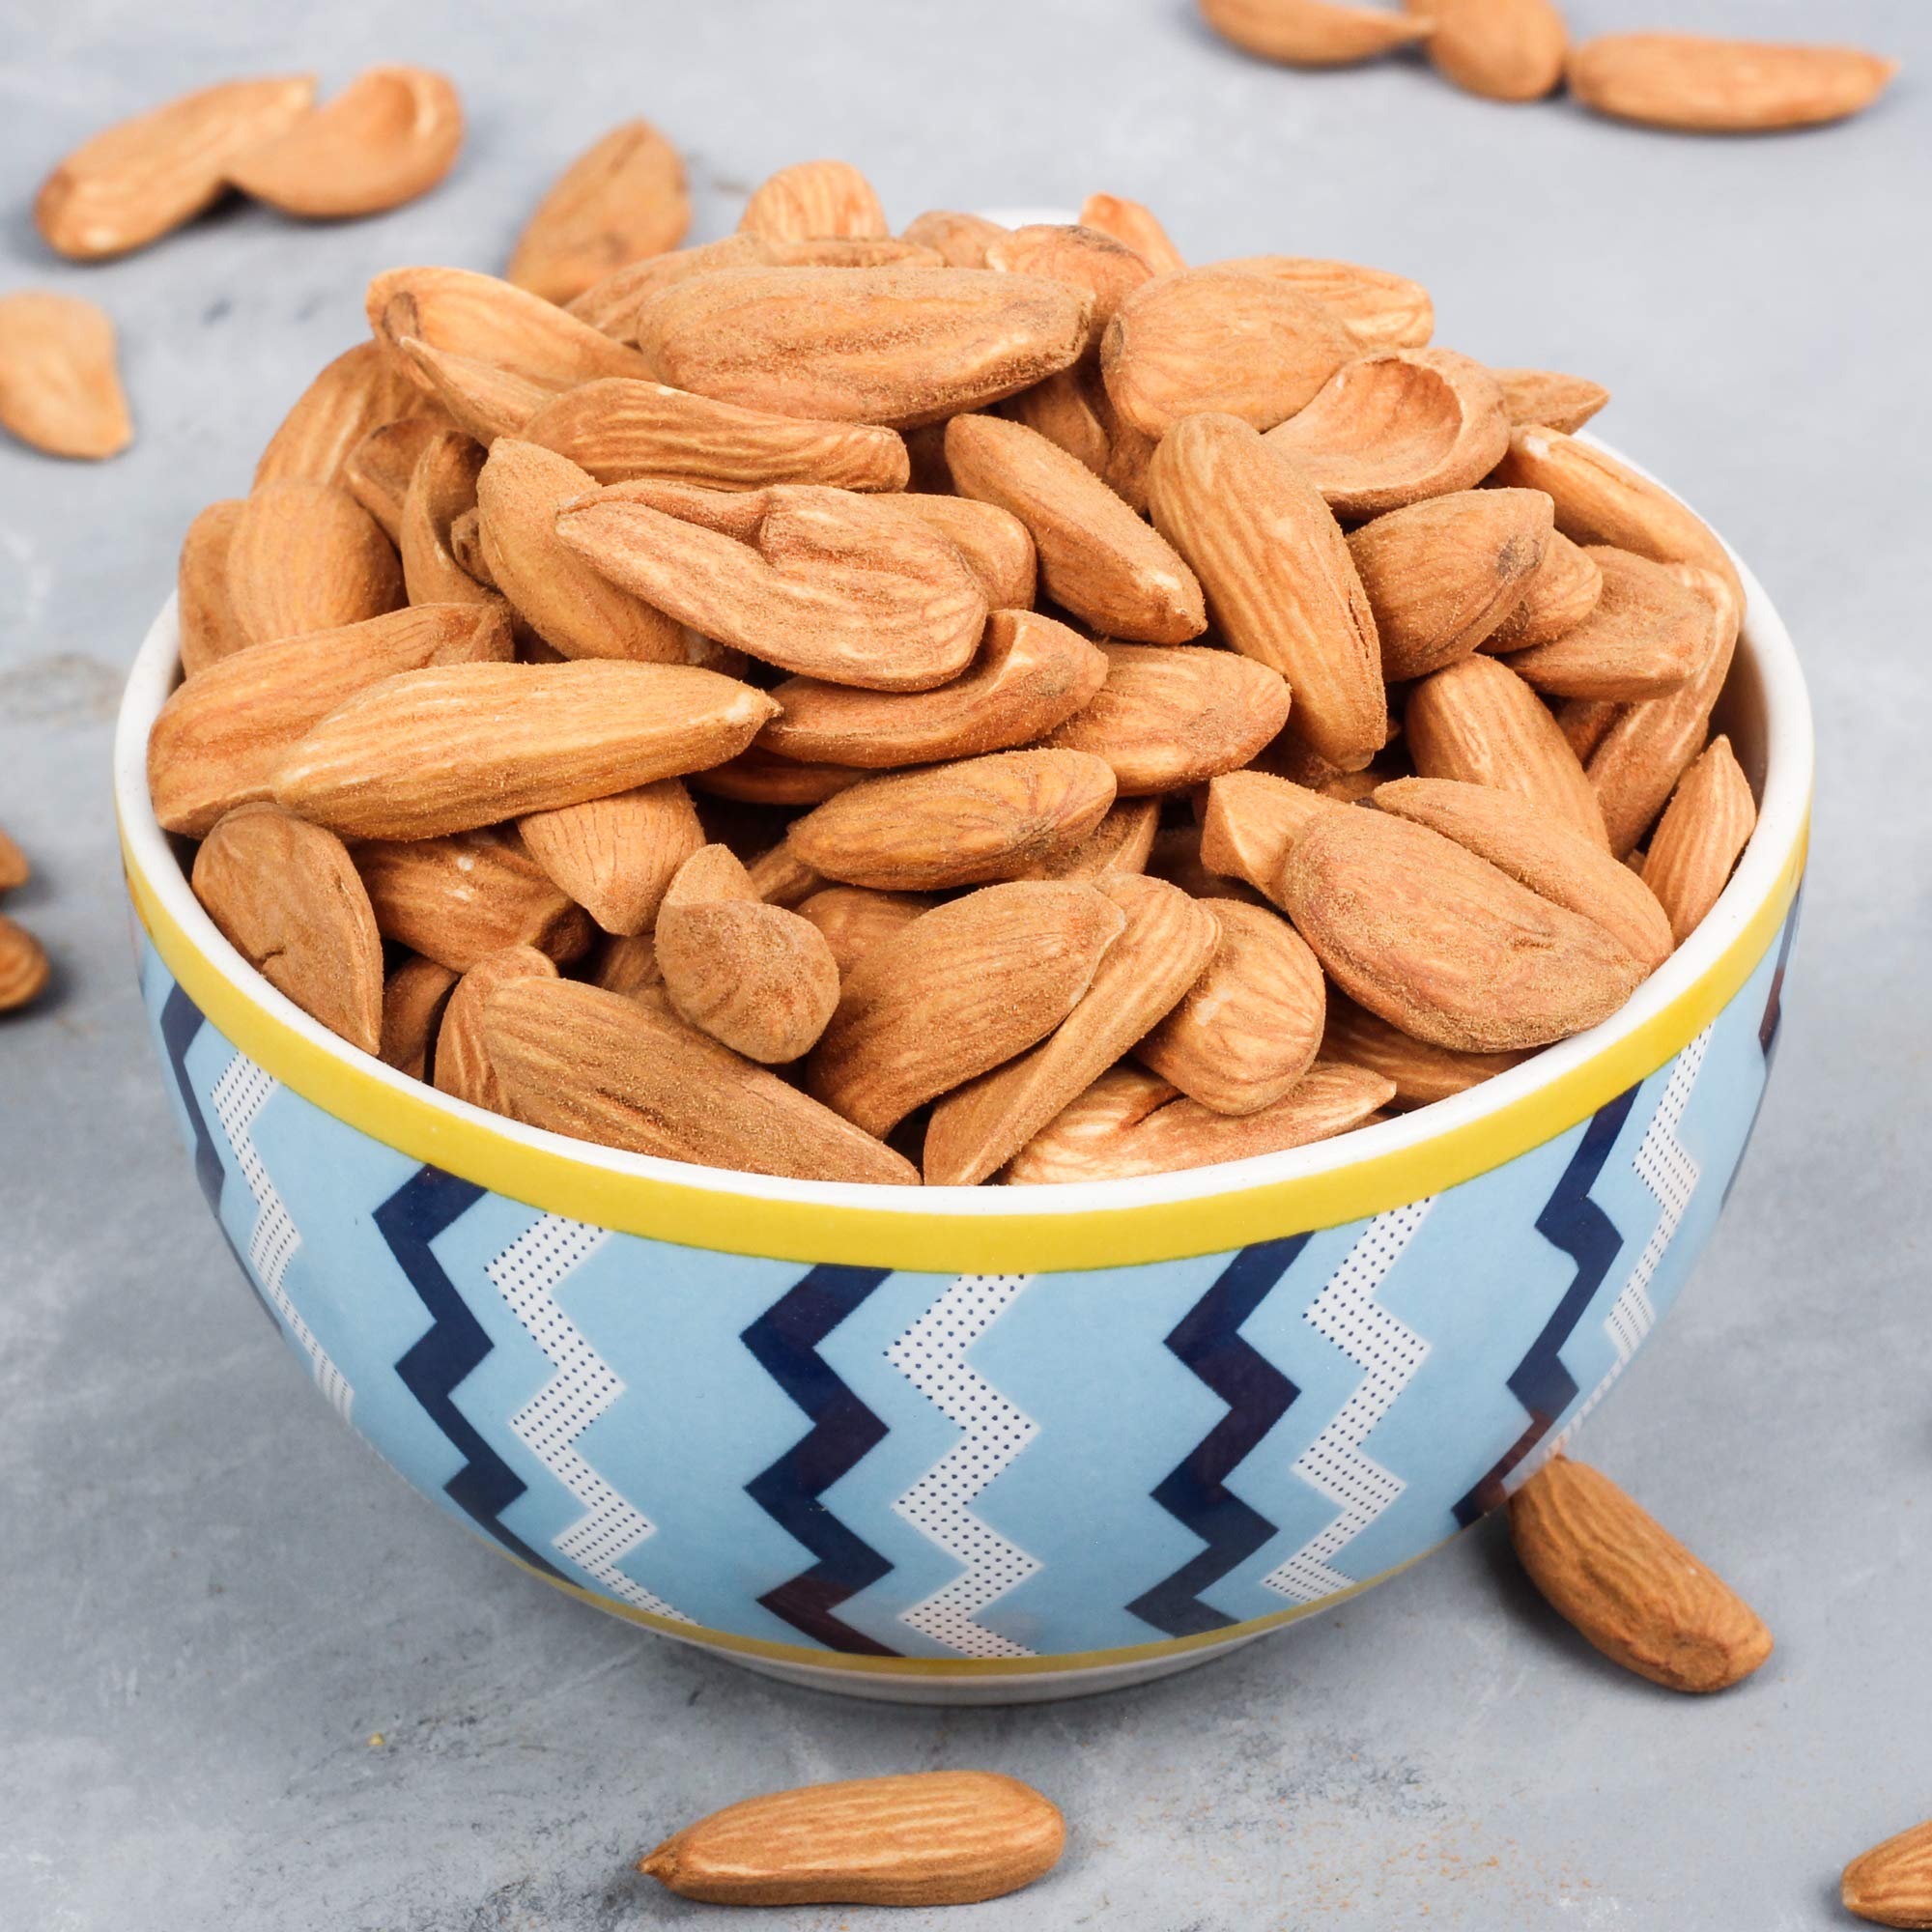  Mamra almond prices today in Iran | Nutex almond